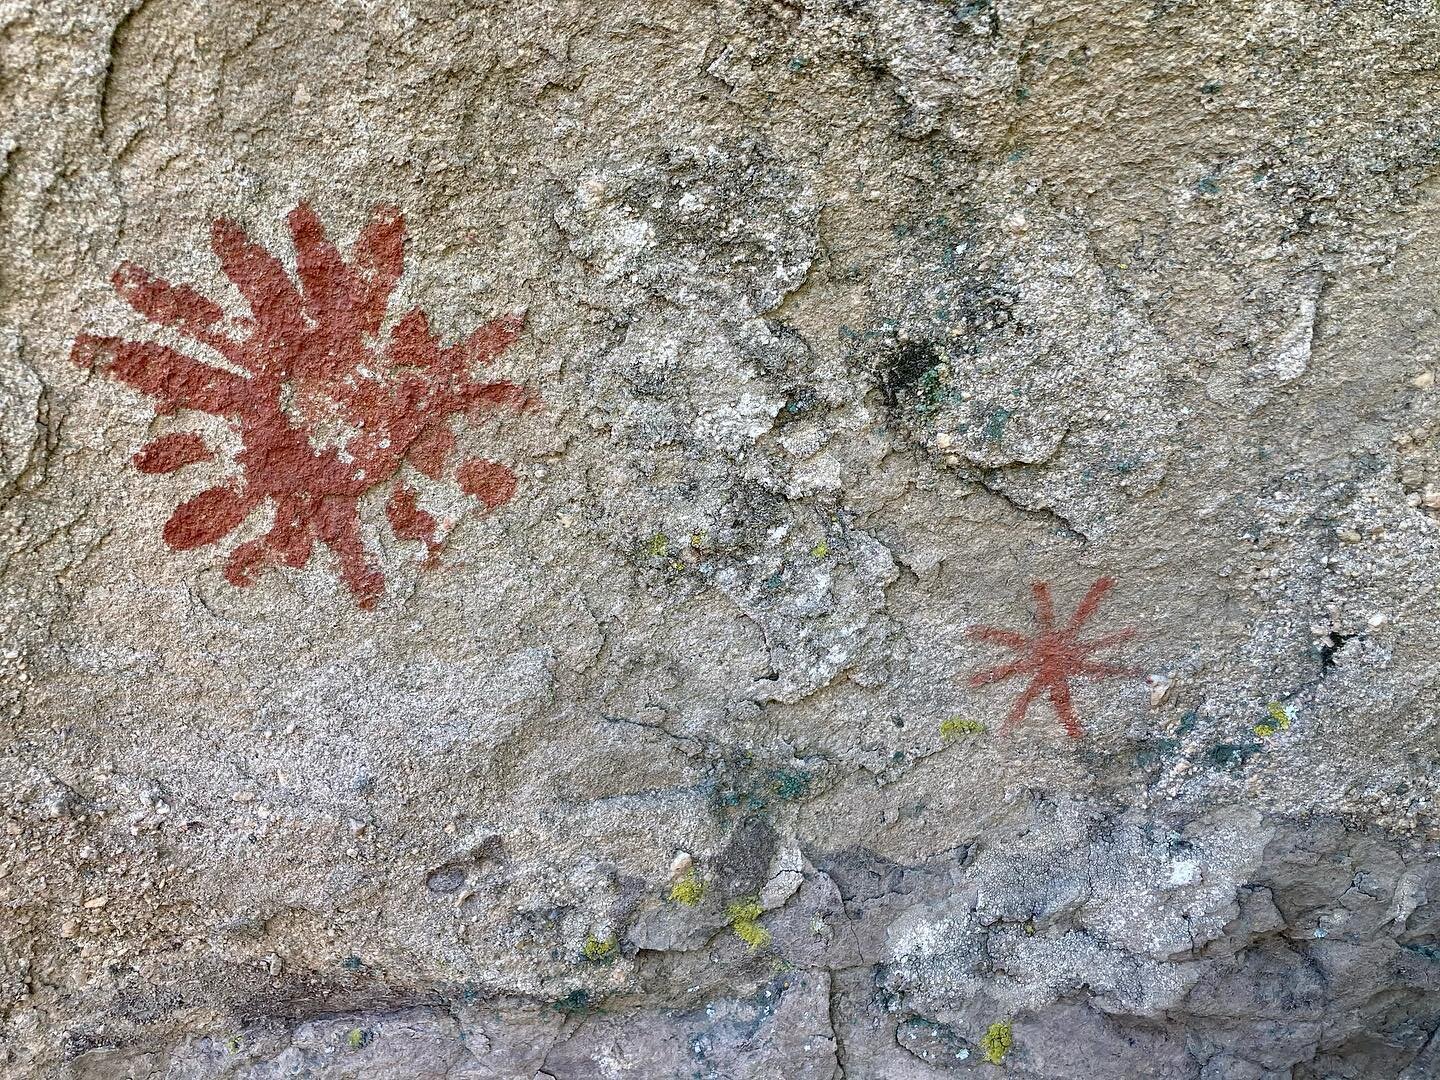 Welcome Vernal Equinox! I was fortunate to visit these Tataviam pictographs yesterday and imagine their importance to the people who created them beneath an ancient dark night sky. 

&ldquo;The Tataviam (a Chumash name meaning &ldquo;people of the su